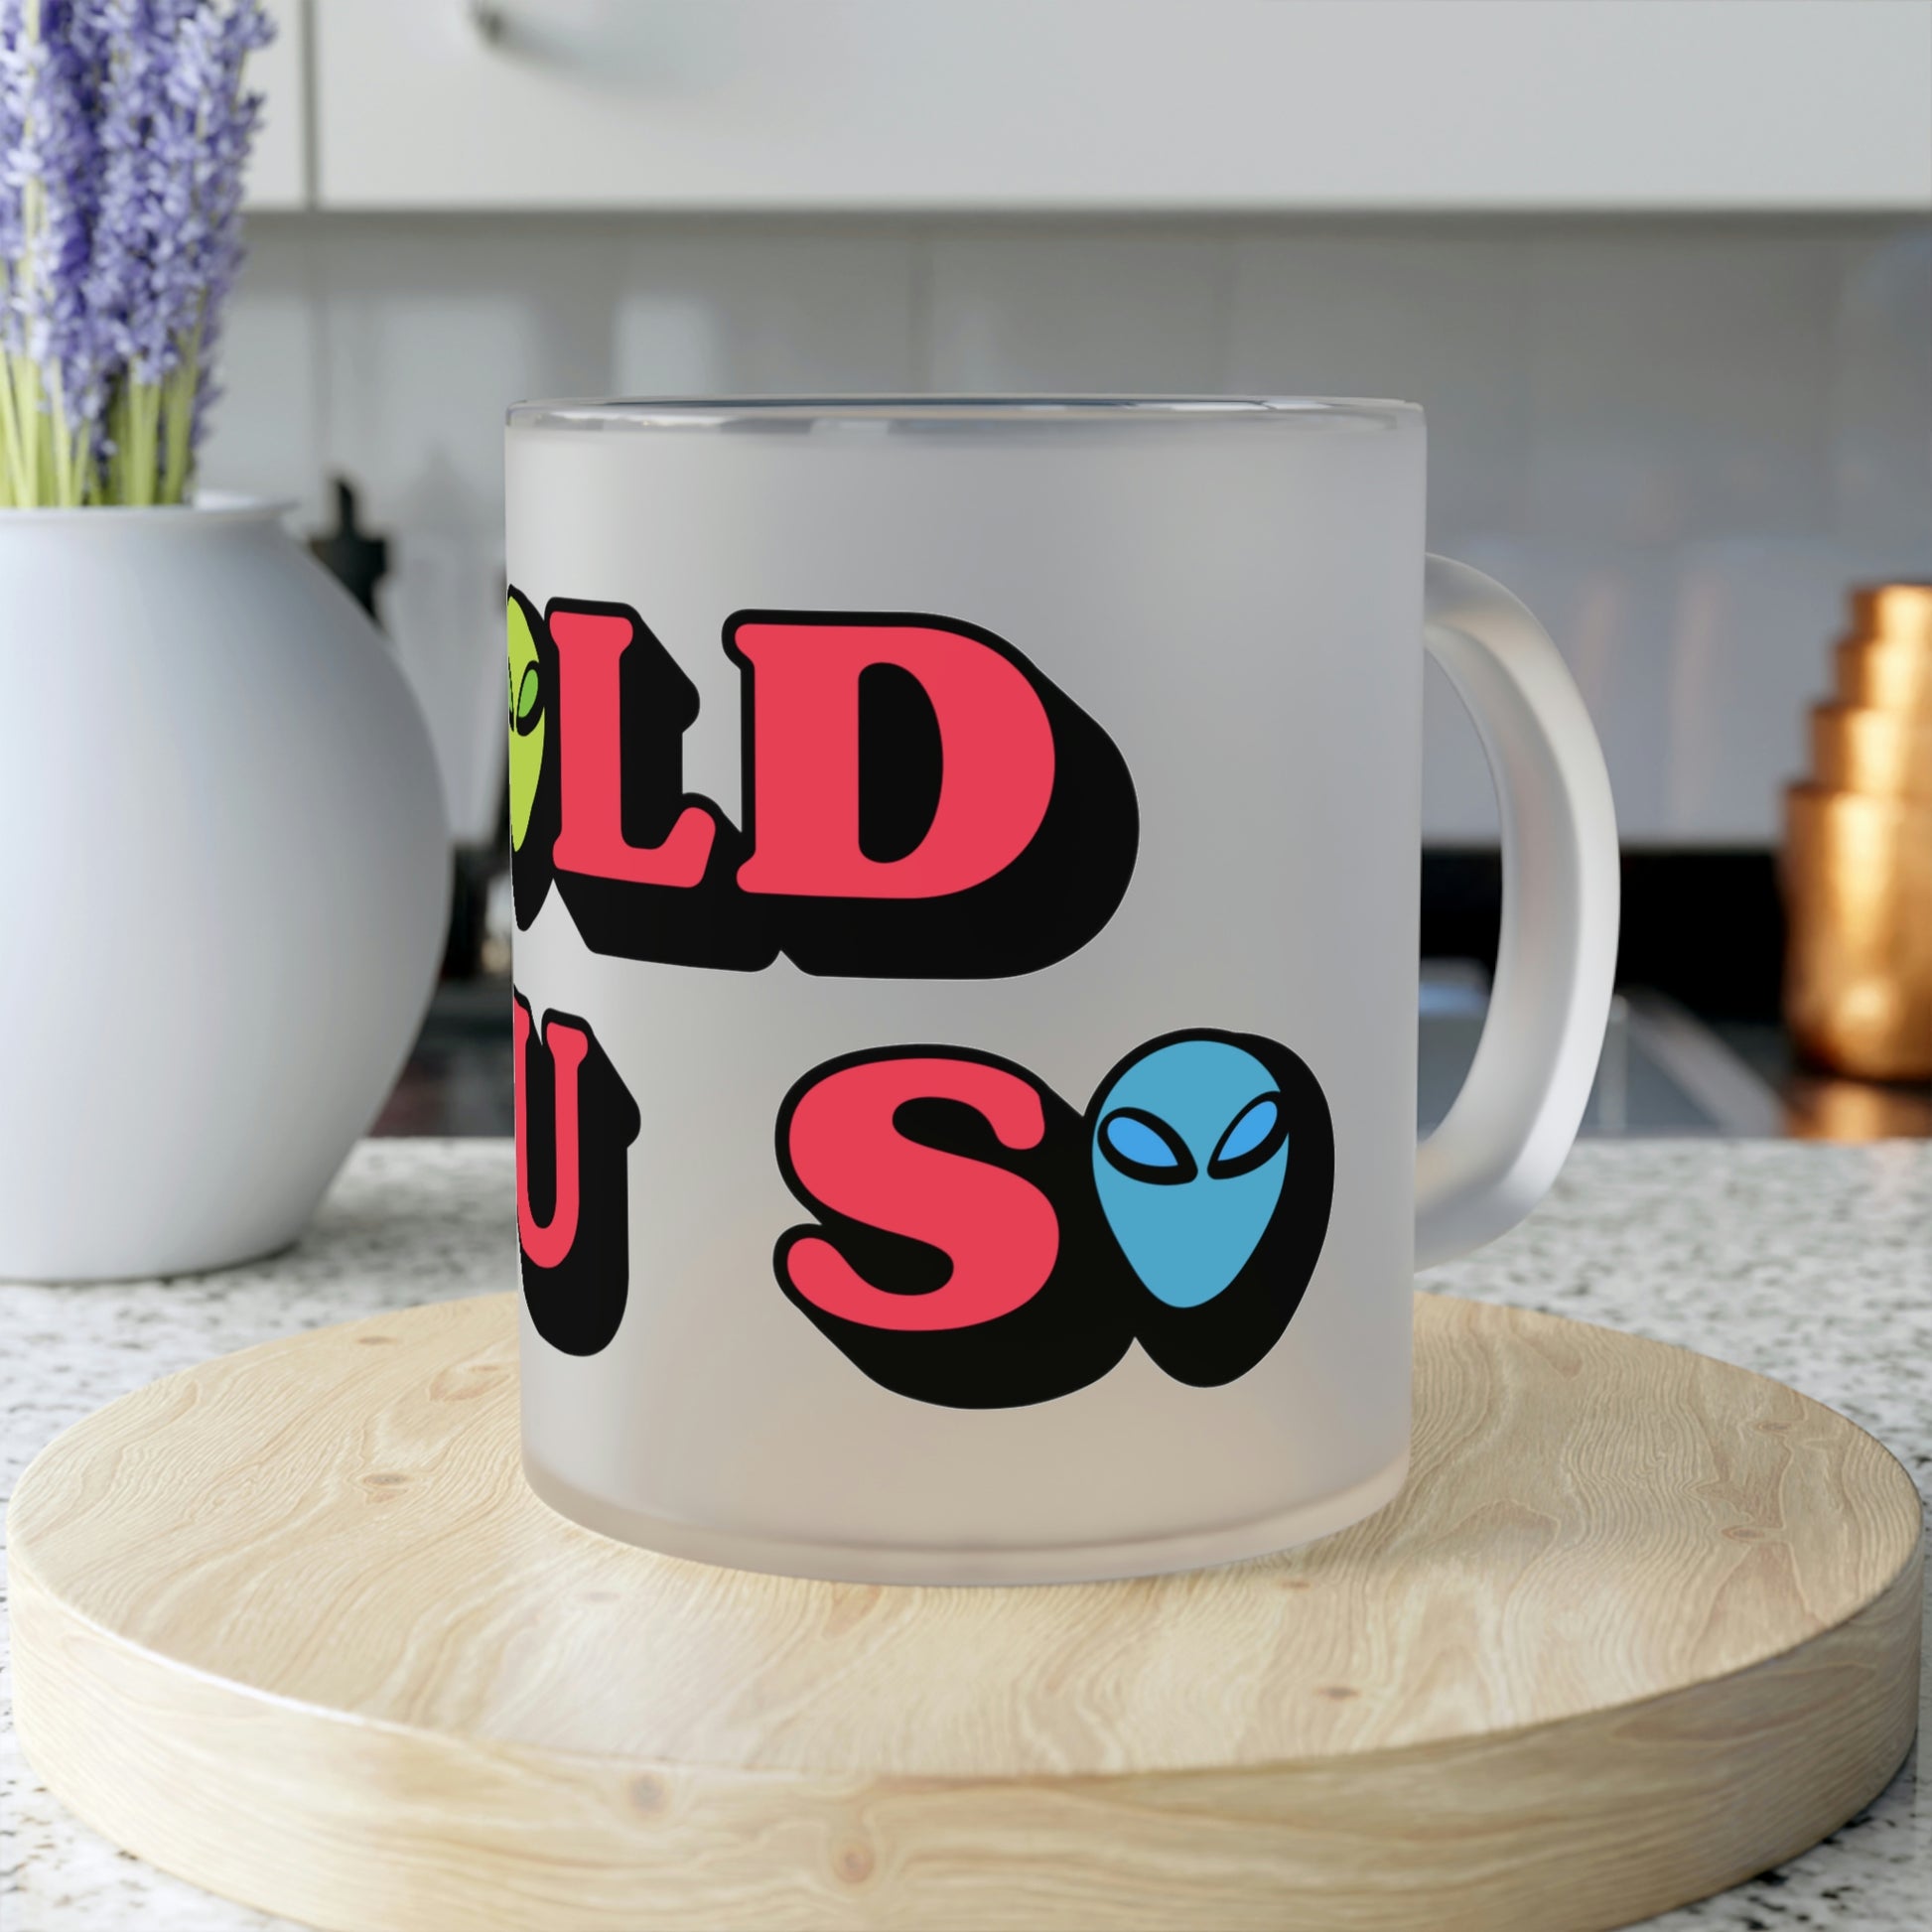 WEIRDO | Frosted mug for your daily coffee or tea! This mug has your favorite meme printed on it: TOLD YOU SO! For you weird people who know the Aliens are already here!